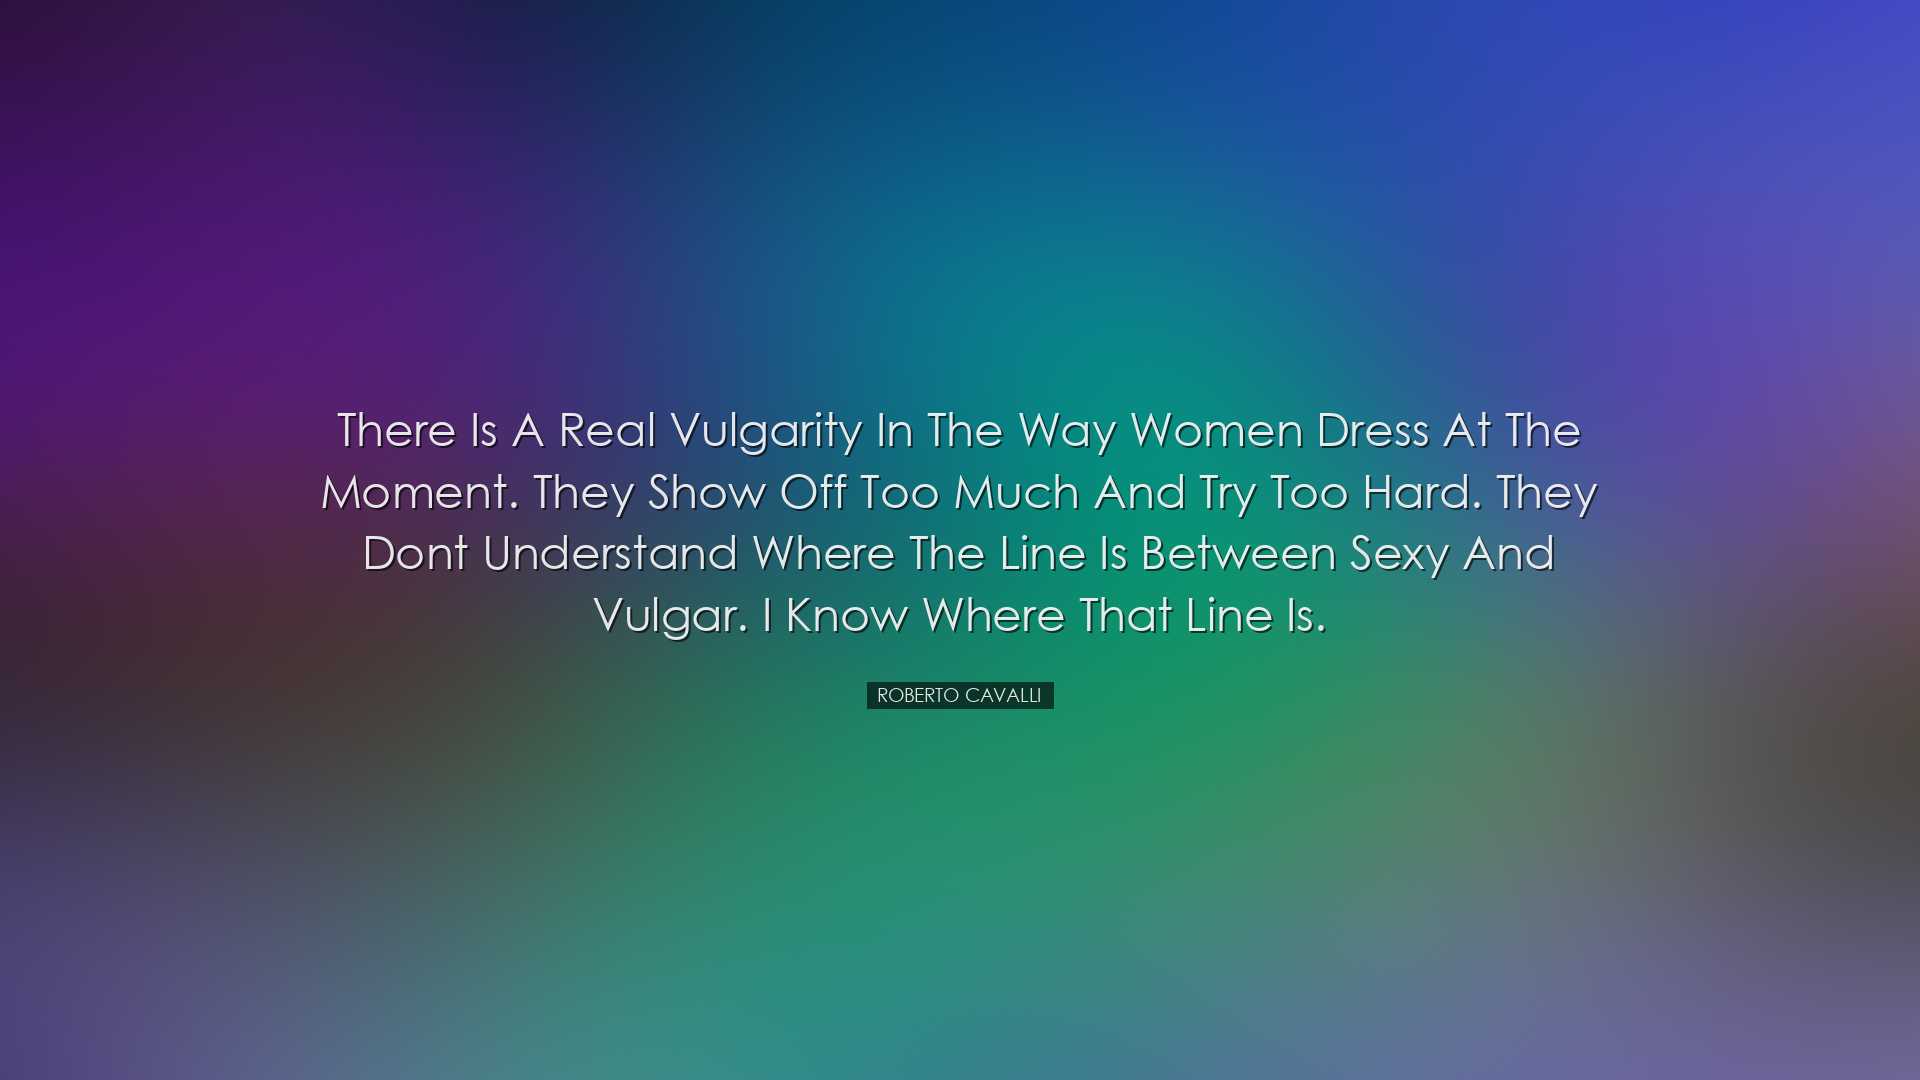 There is a real vulgarity in the way women dress at the moment. Th